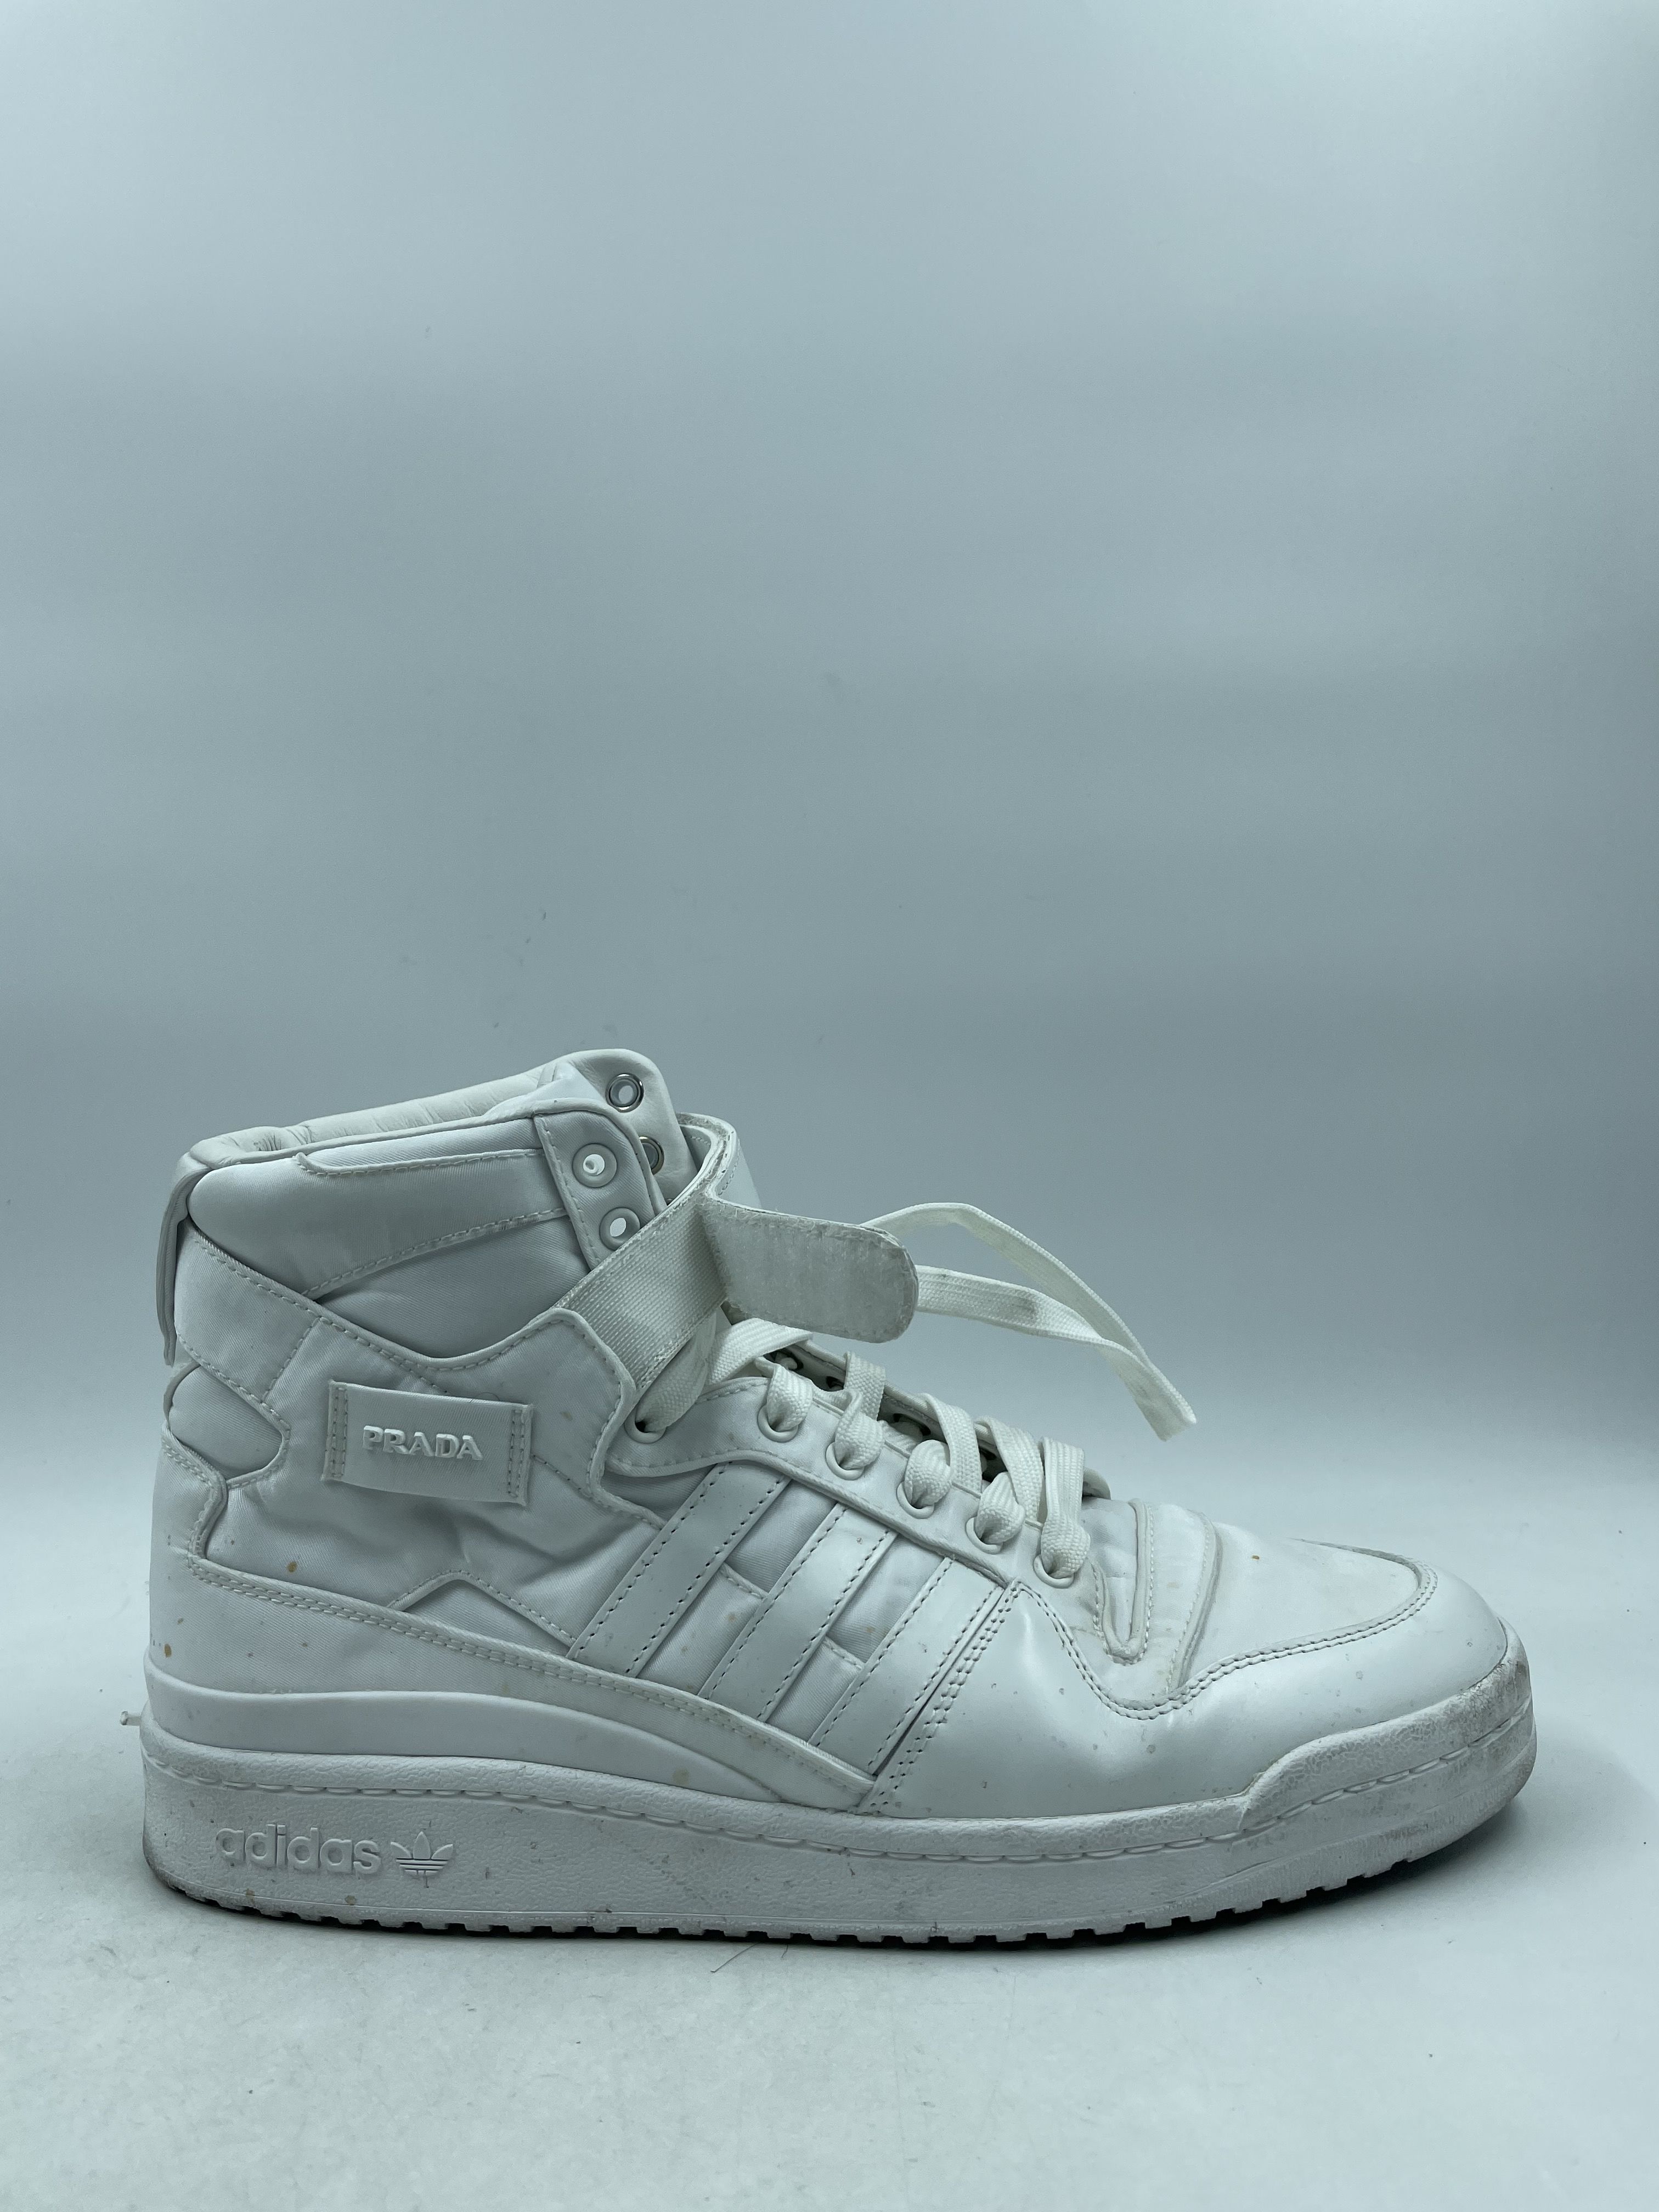 Buy Authentic Prada X adidas Forum High Re-Nylon M 9.5 for USD 189.99 |  GoodwillFinds